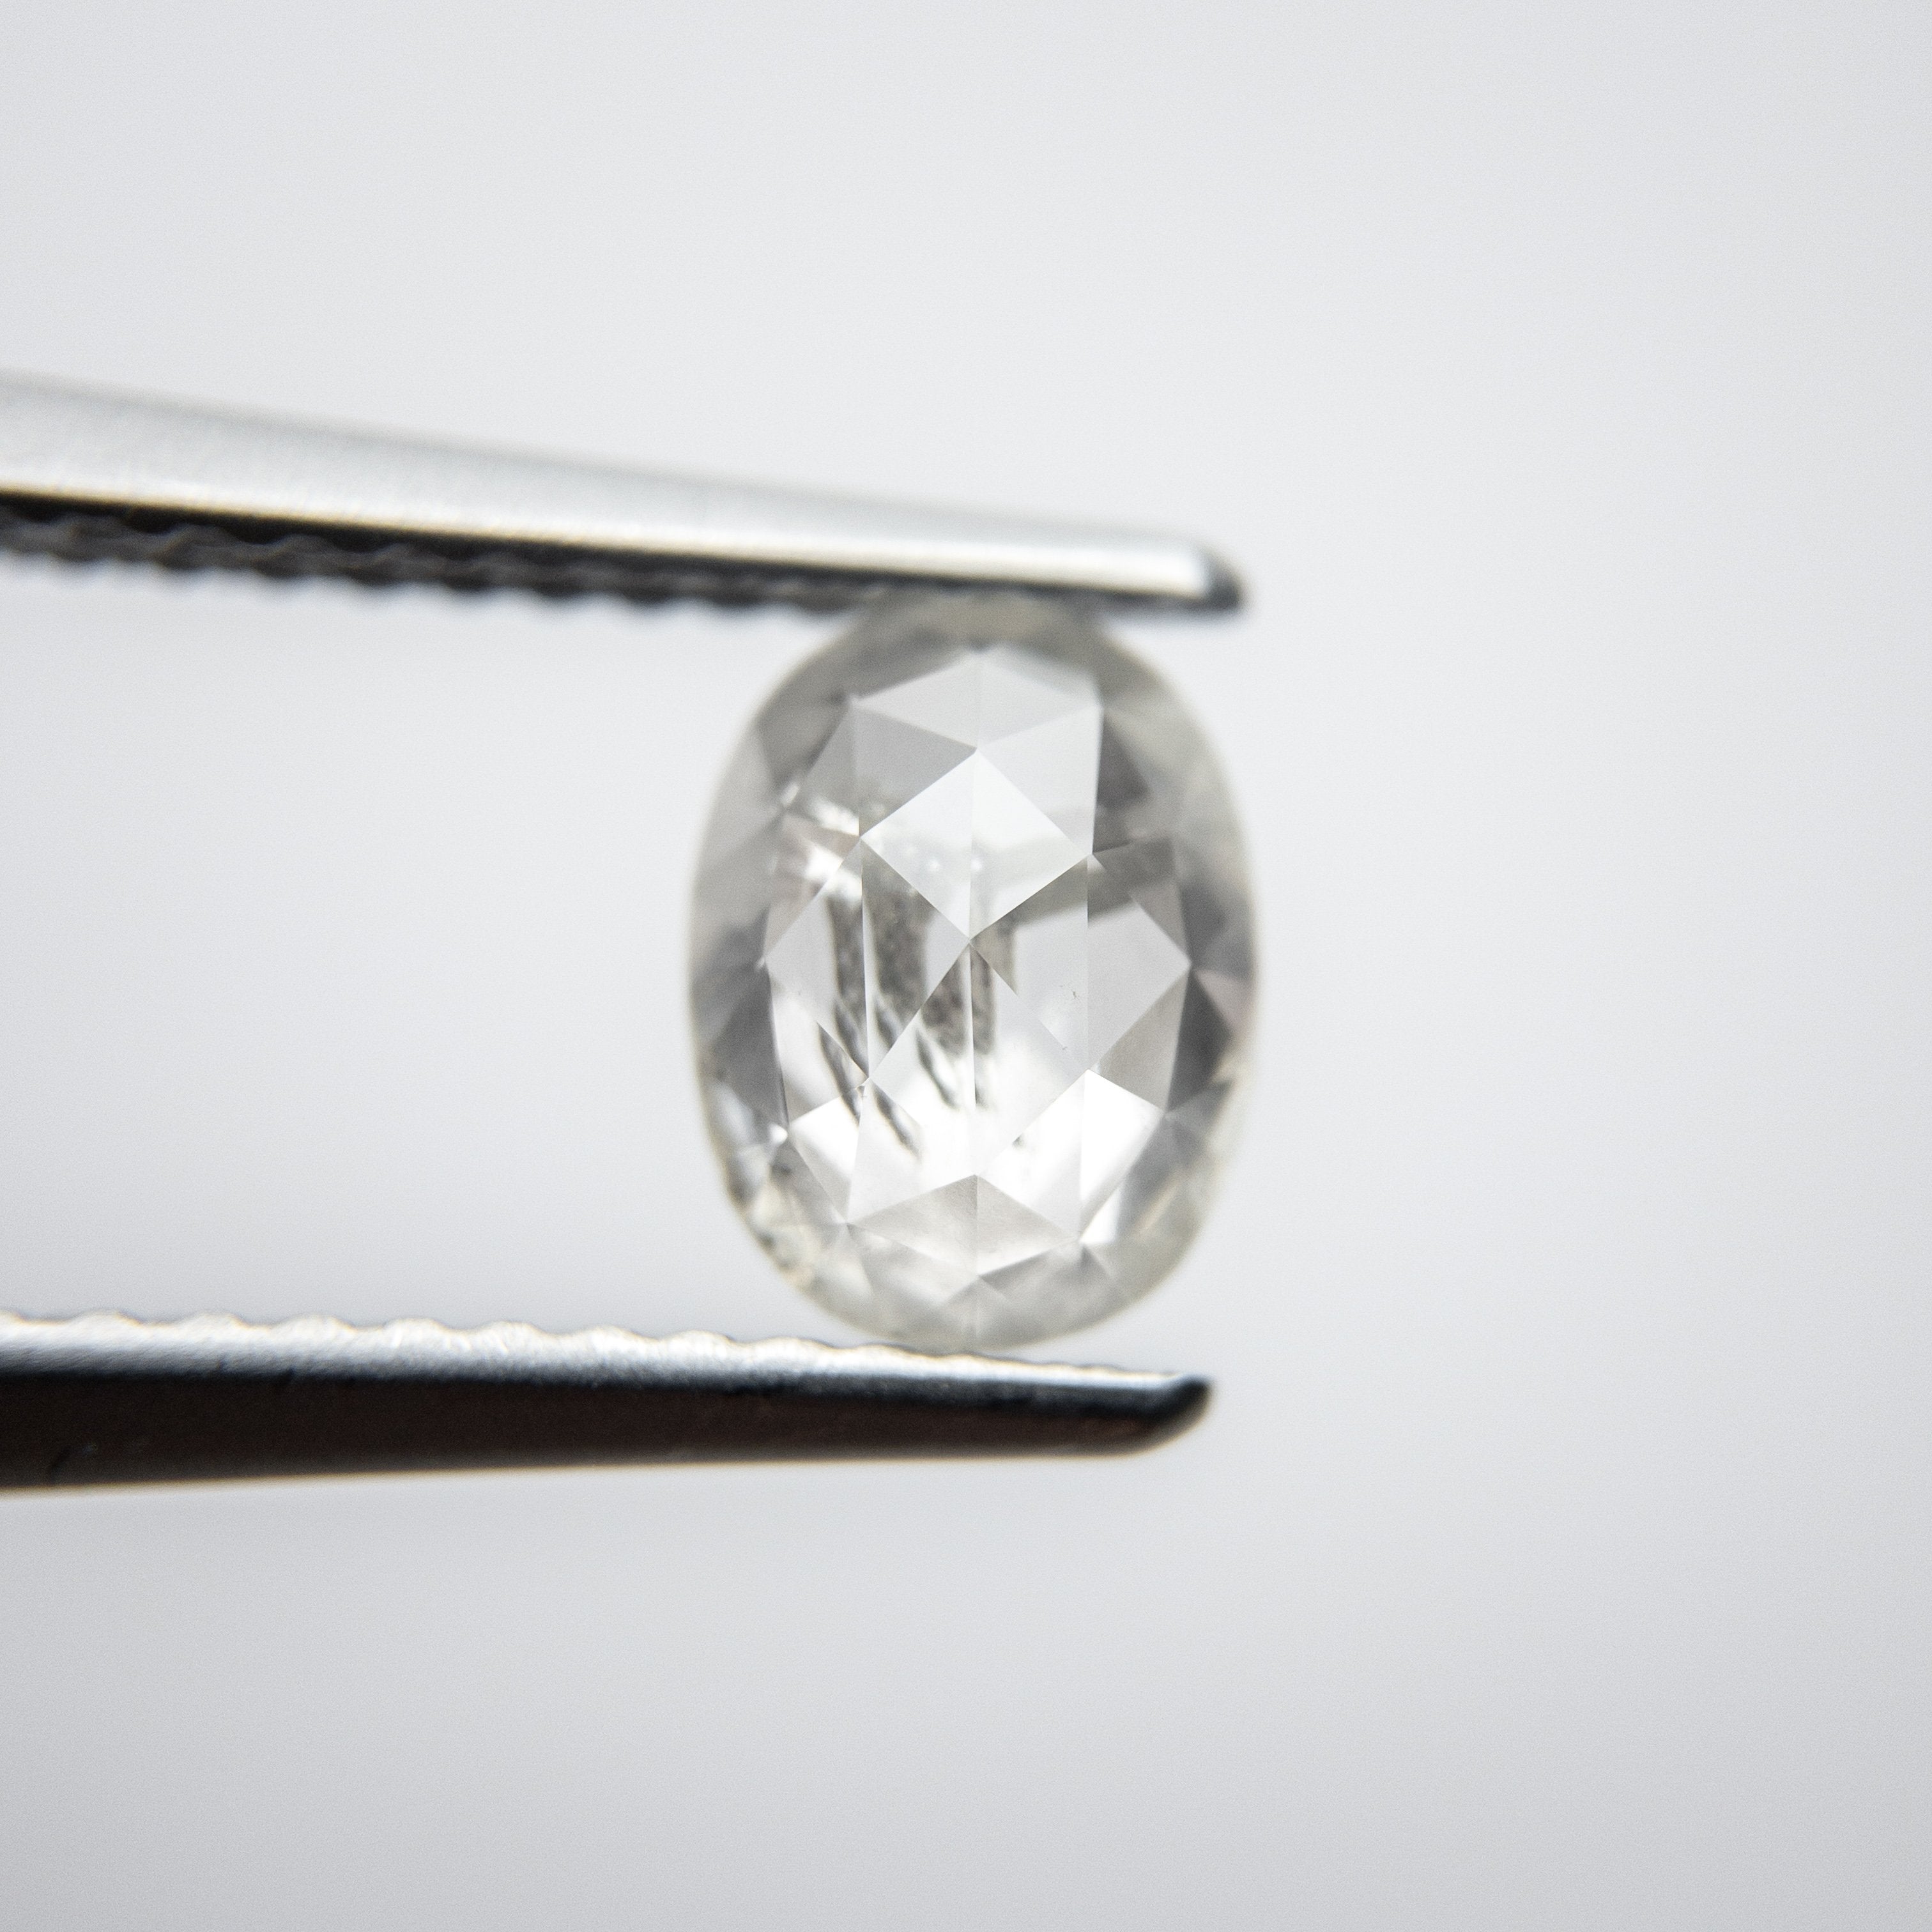 1.21ct 7.47x5.68x3.03mm Oval Rosecut 18121-06 HOLD D854